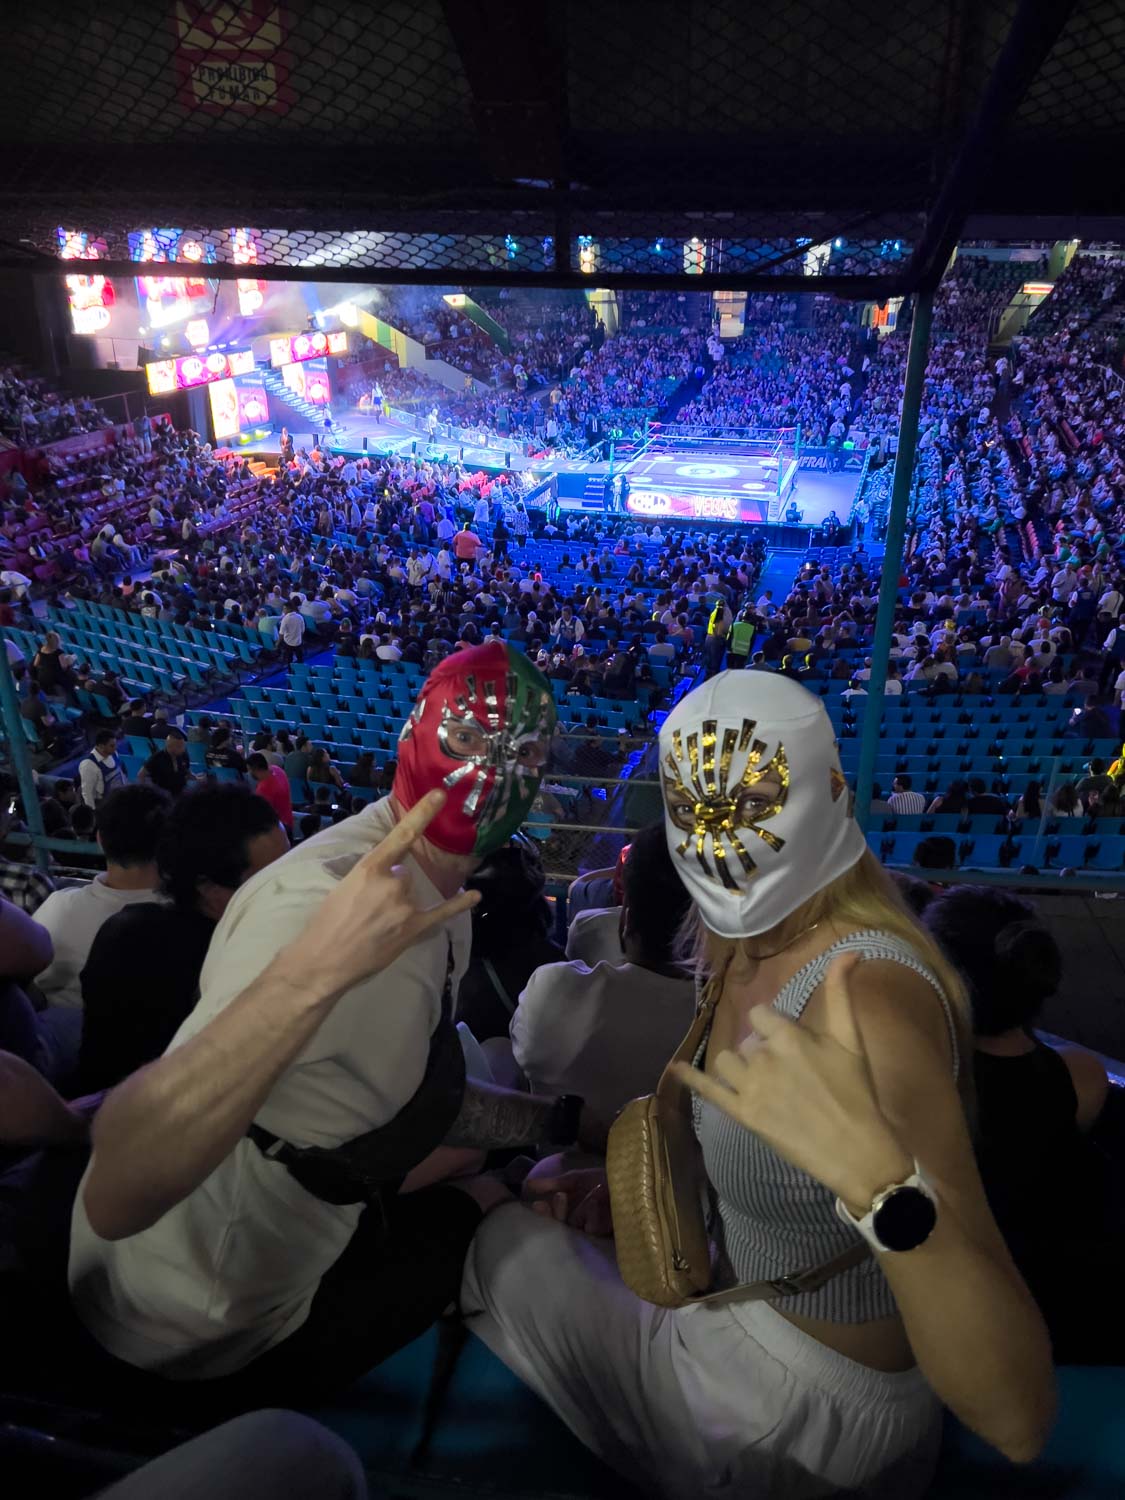 Bloggers Mal and Robin attending a Lucha Libre show.